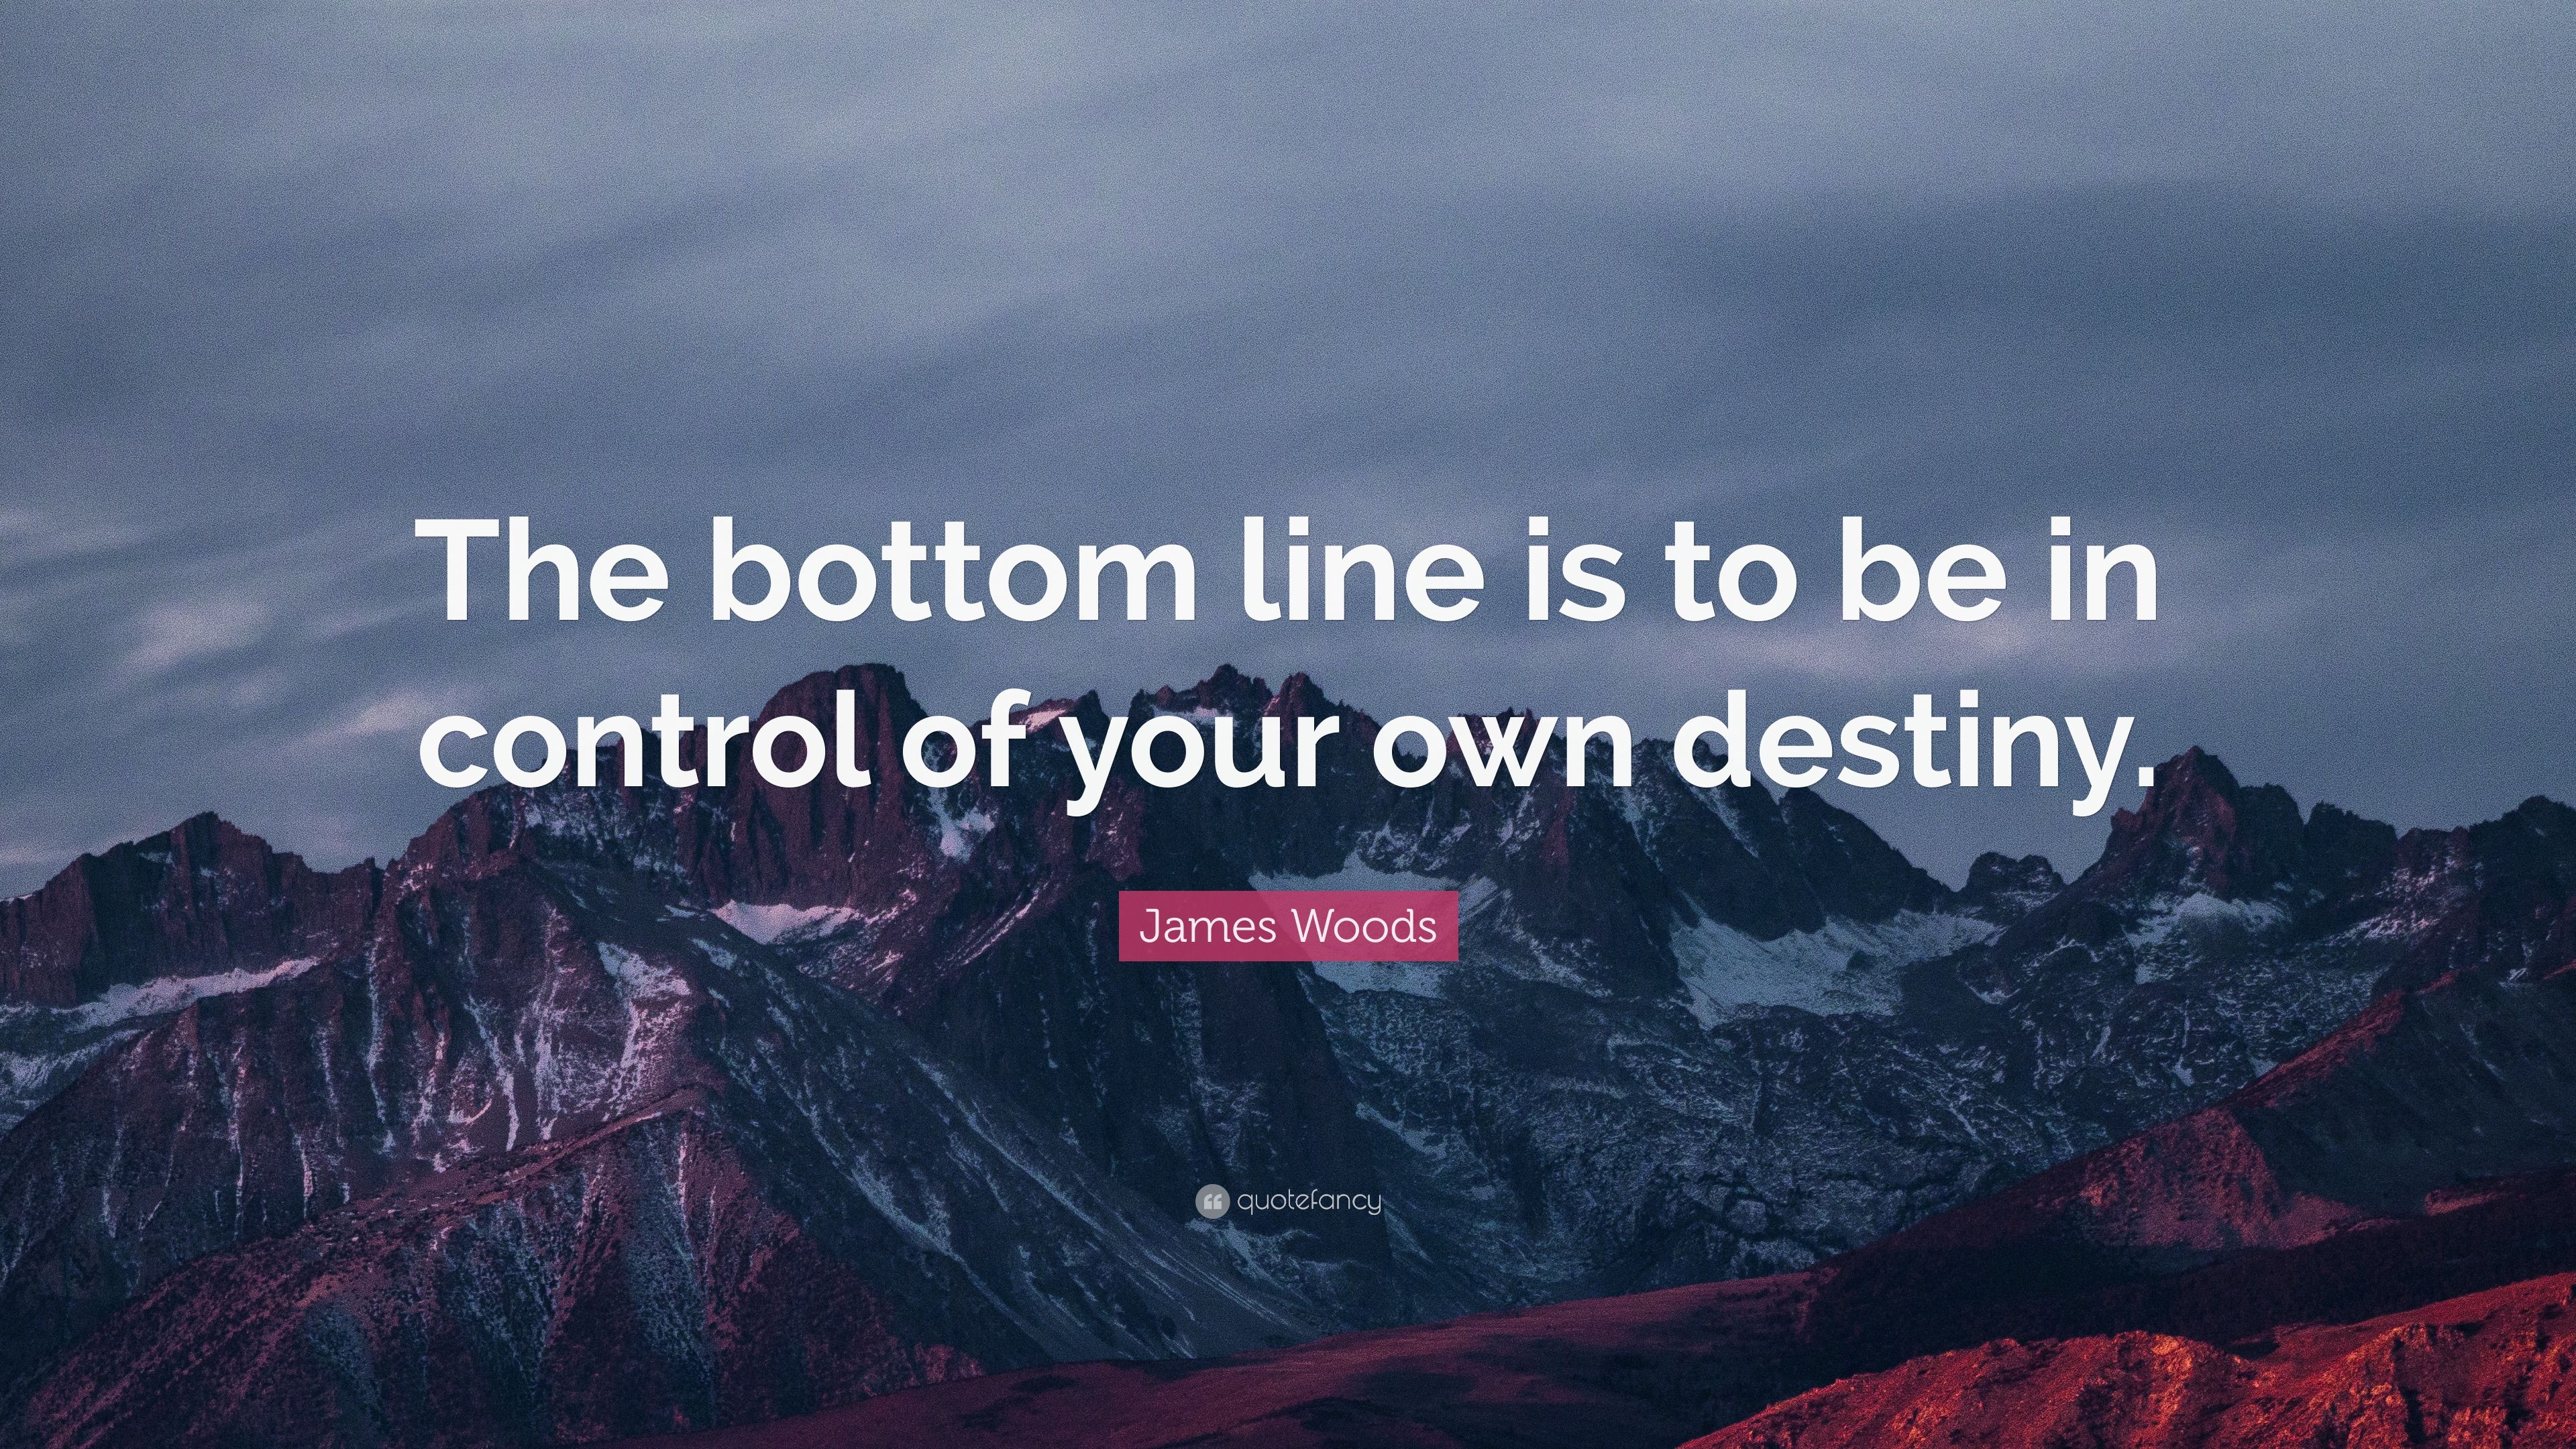 James Woods Quote: “The bottom line is to be in control of your